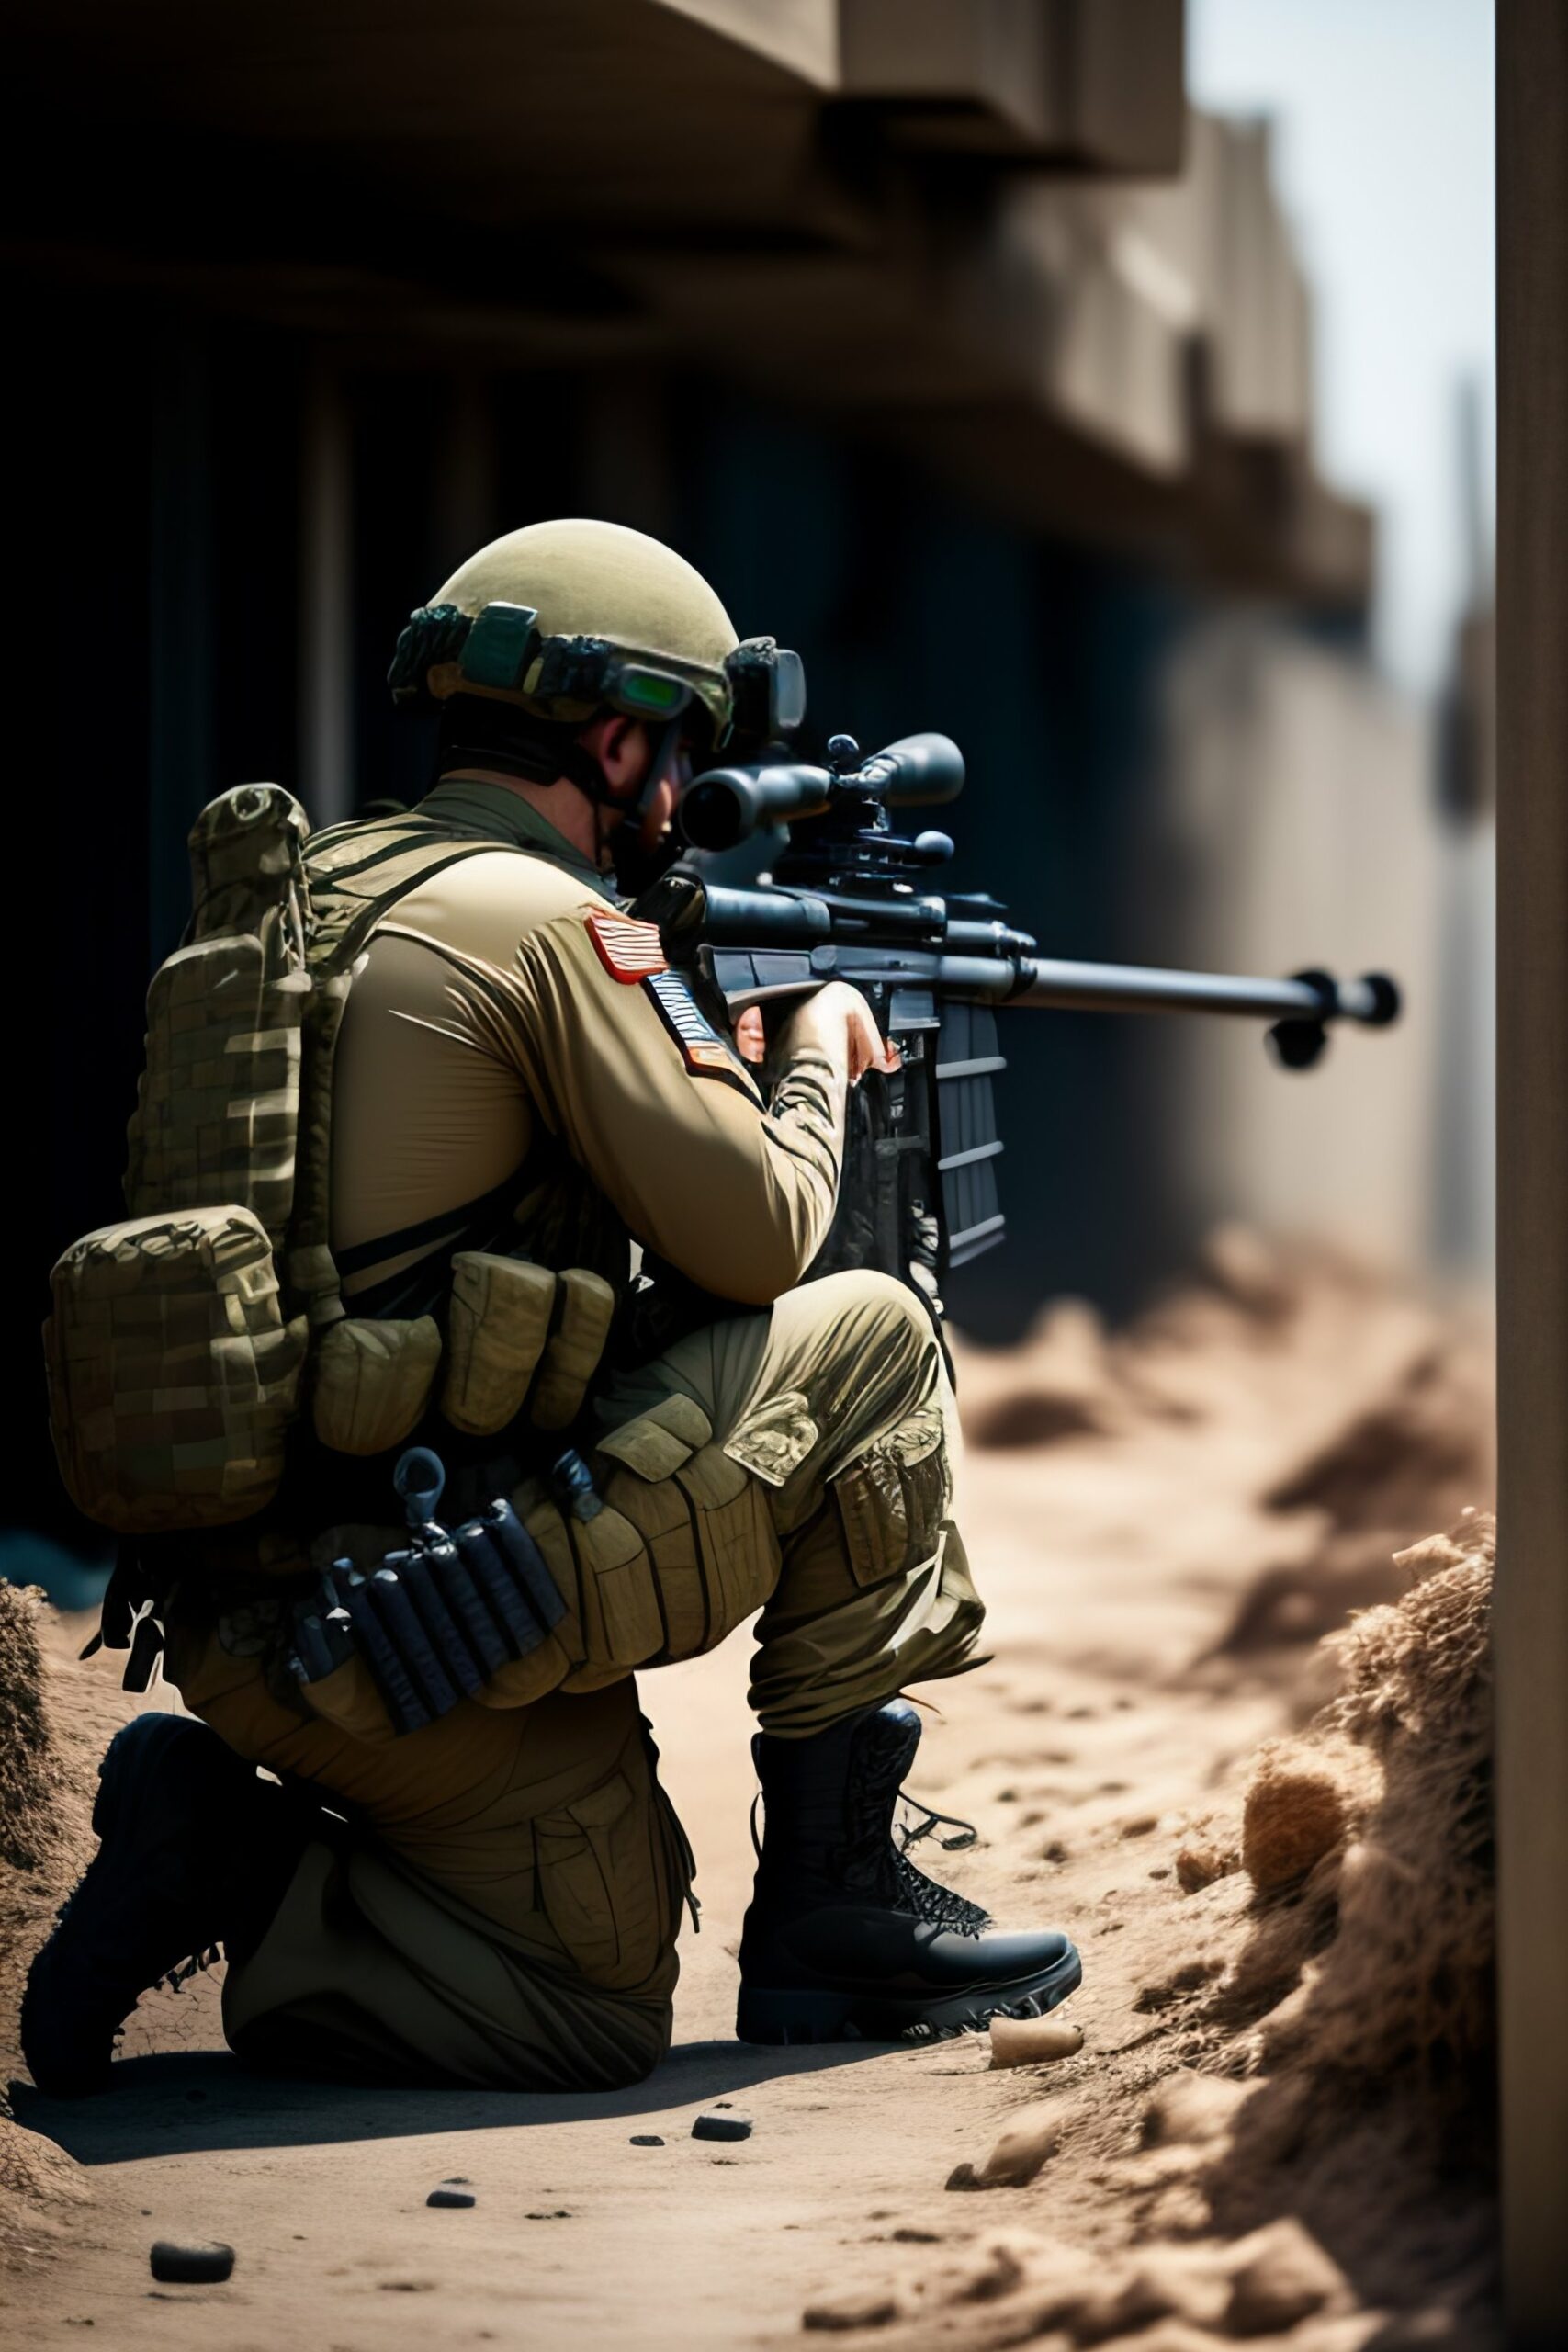 Tactical Protect The Advantages of Using Tactical Equipment in the Field